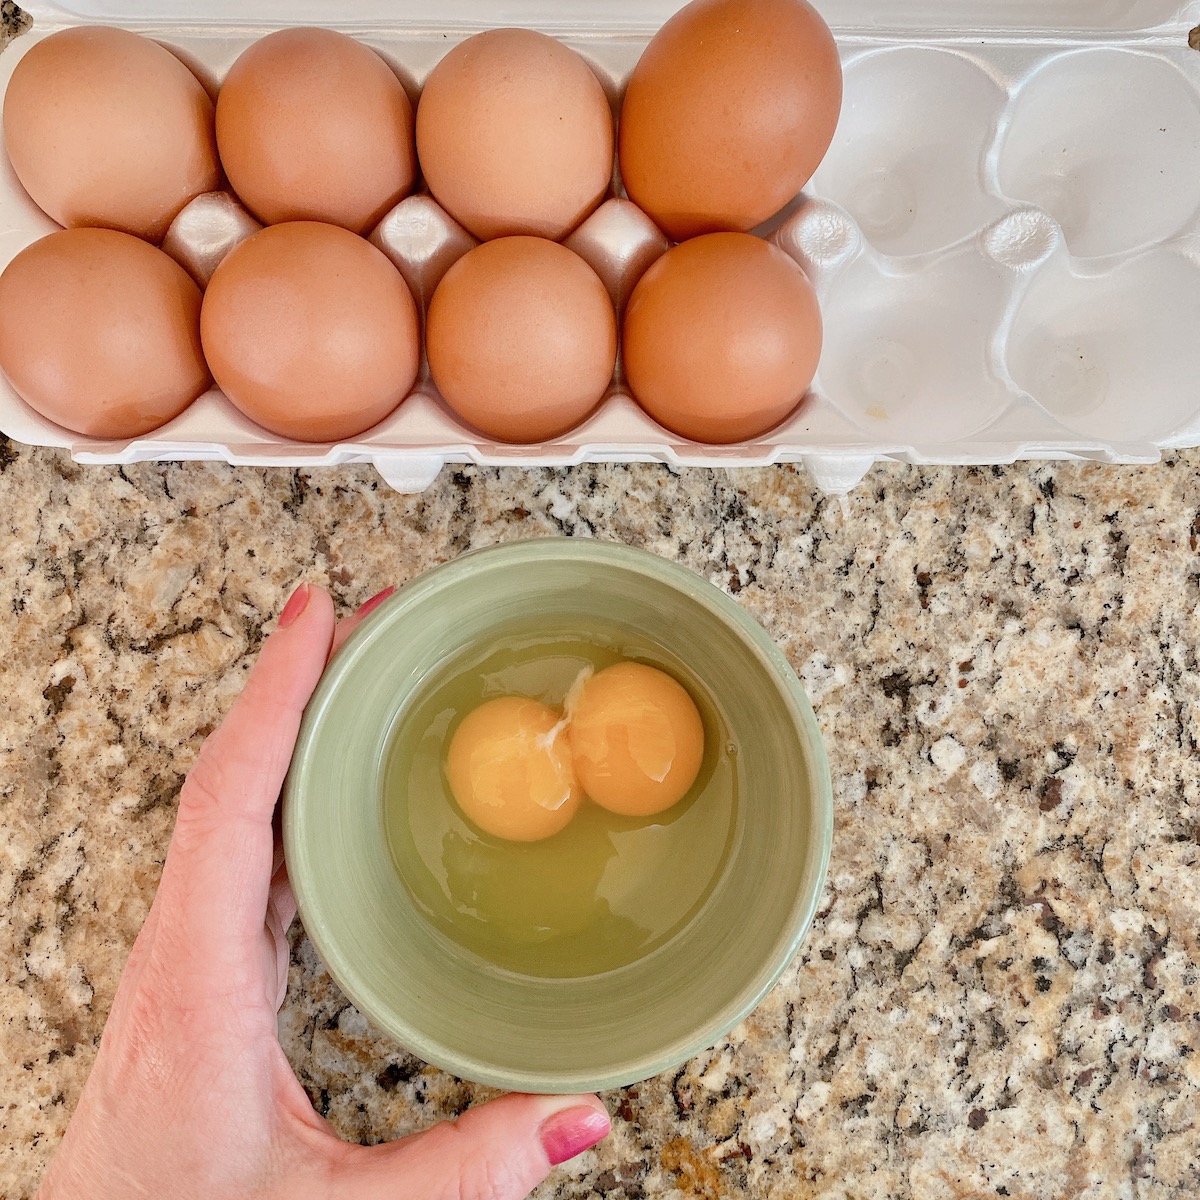 carton of eggs and a hand holding a bowl of a cracked double yolk egg